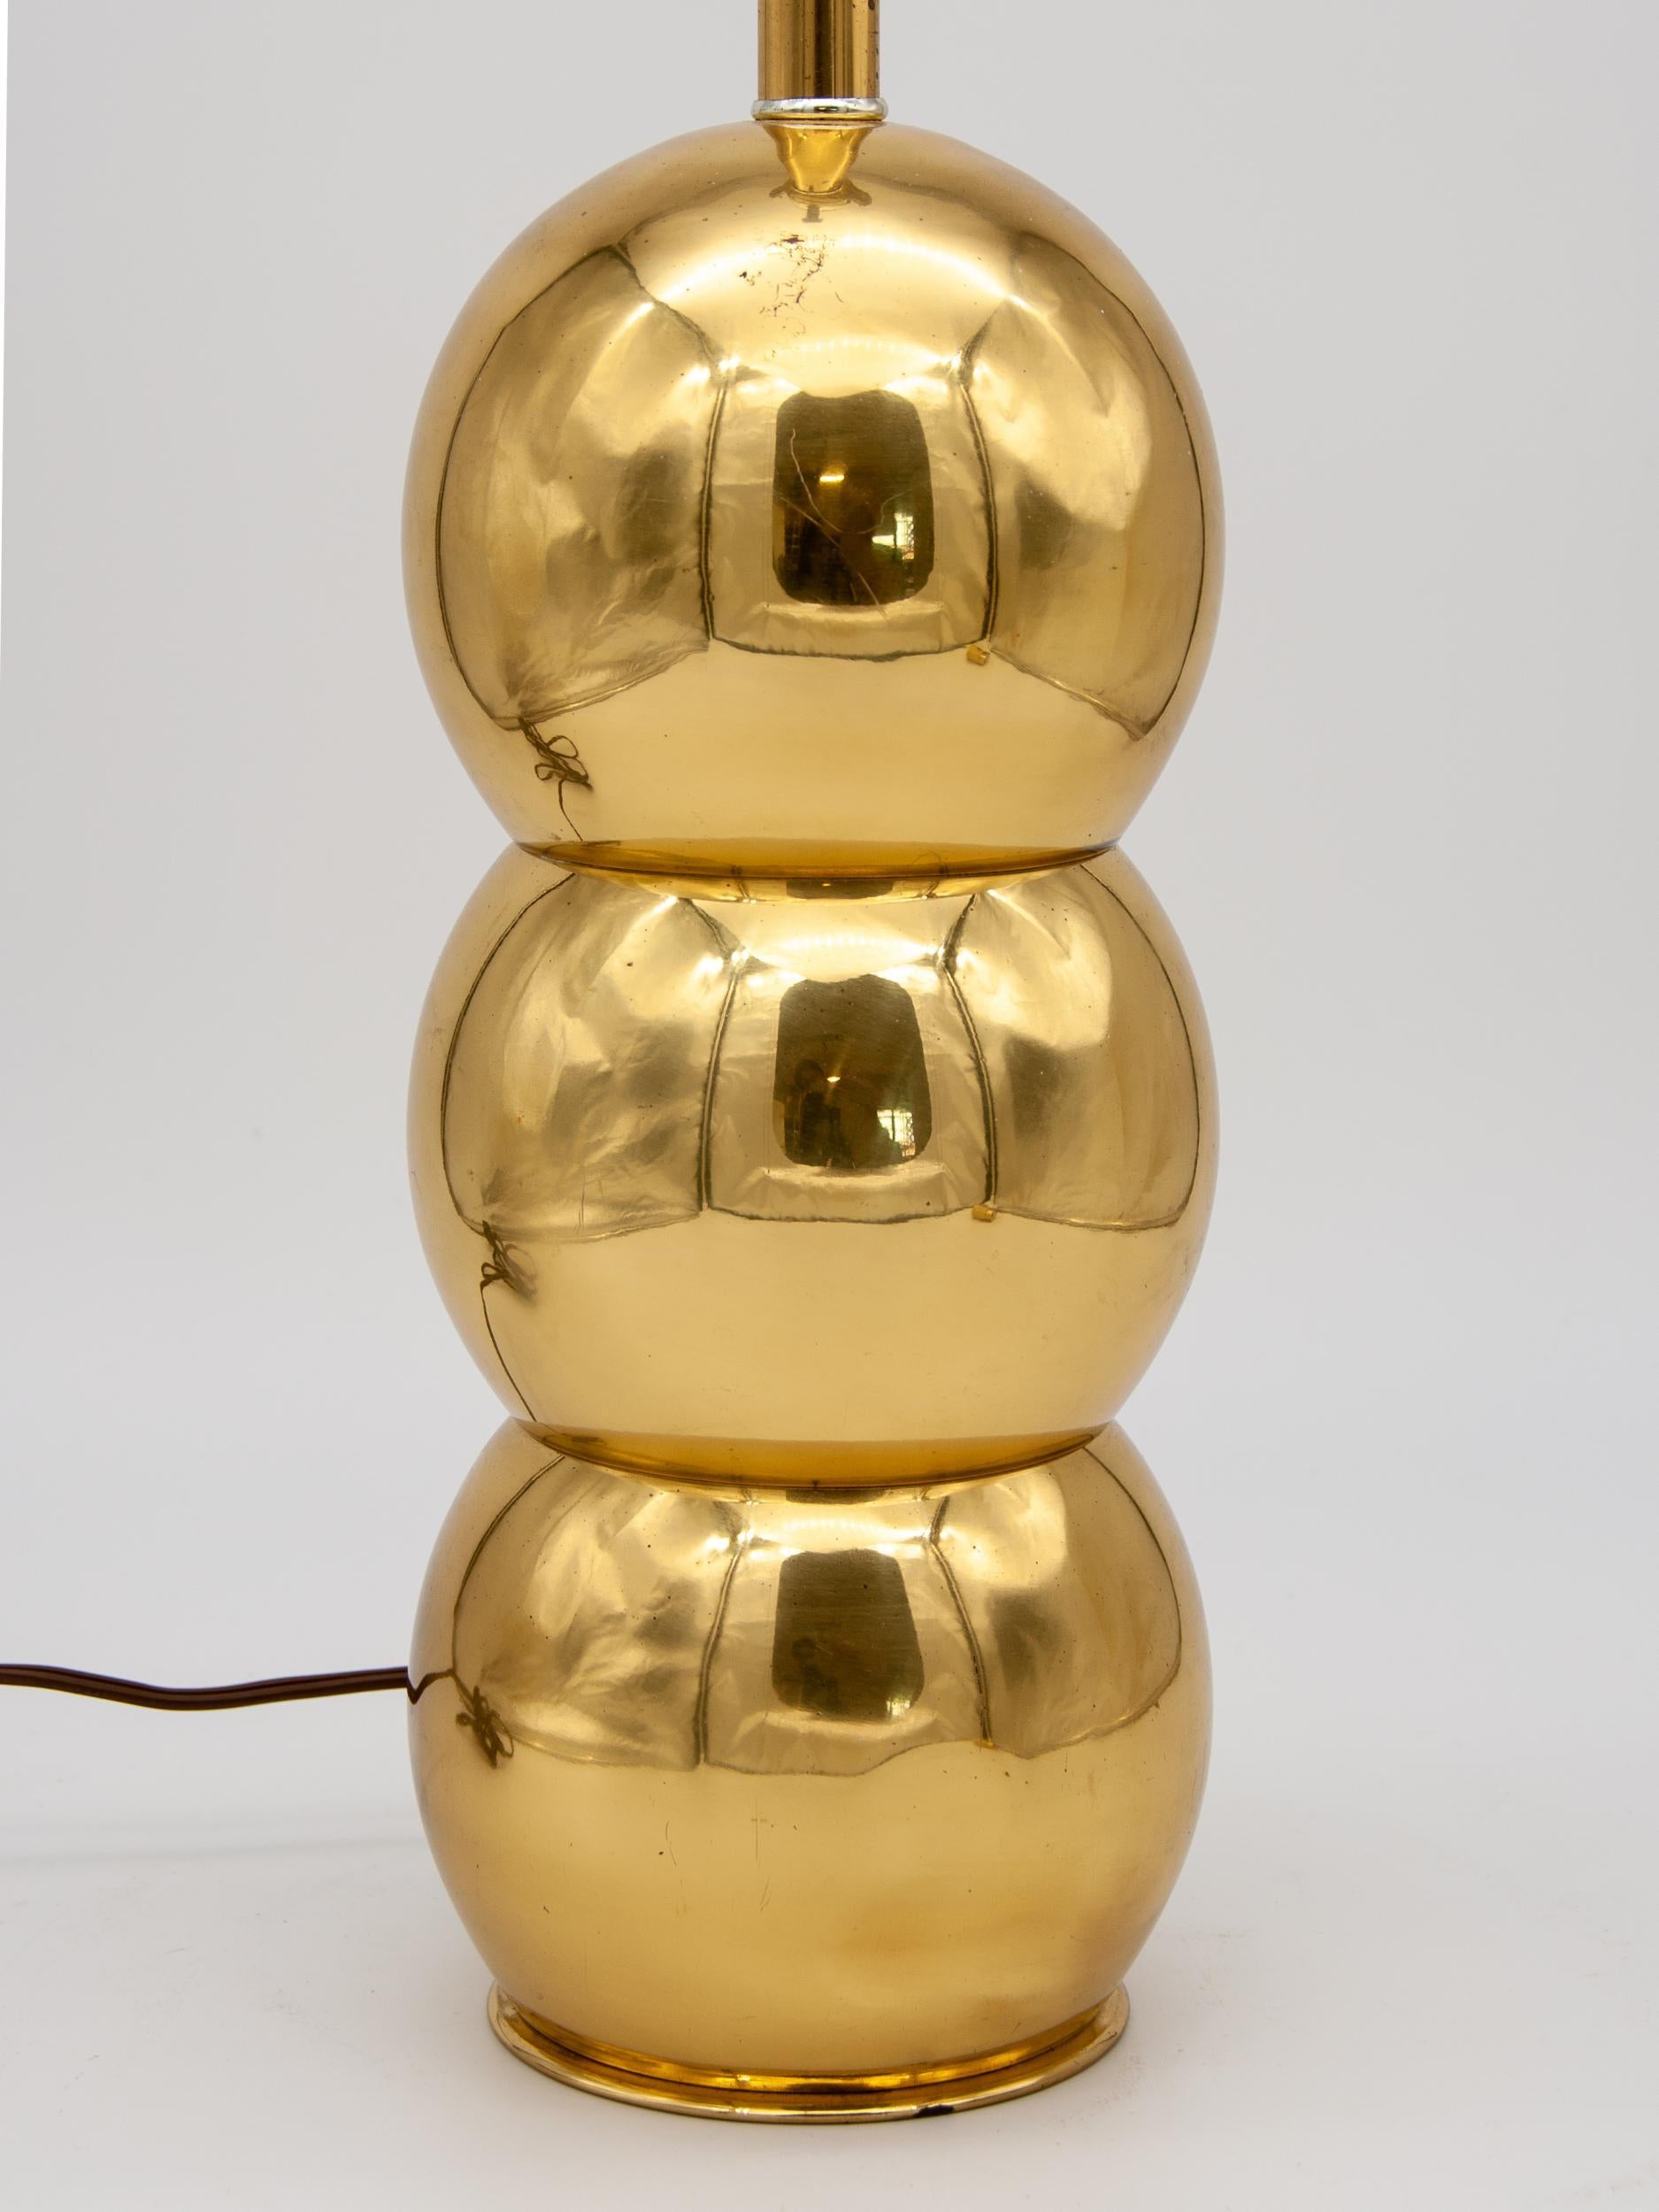 Mid-Century Modern brass bubble lamp. A whimsical shape in a chic finish makes this lamp a show stopper for any vignette. This lamp has been rewired and is in great shape.